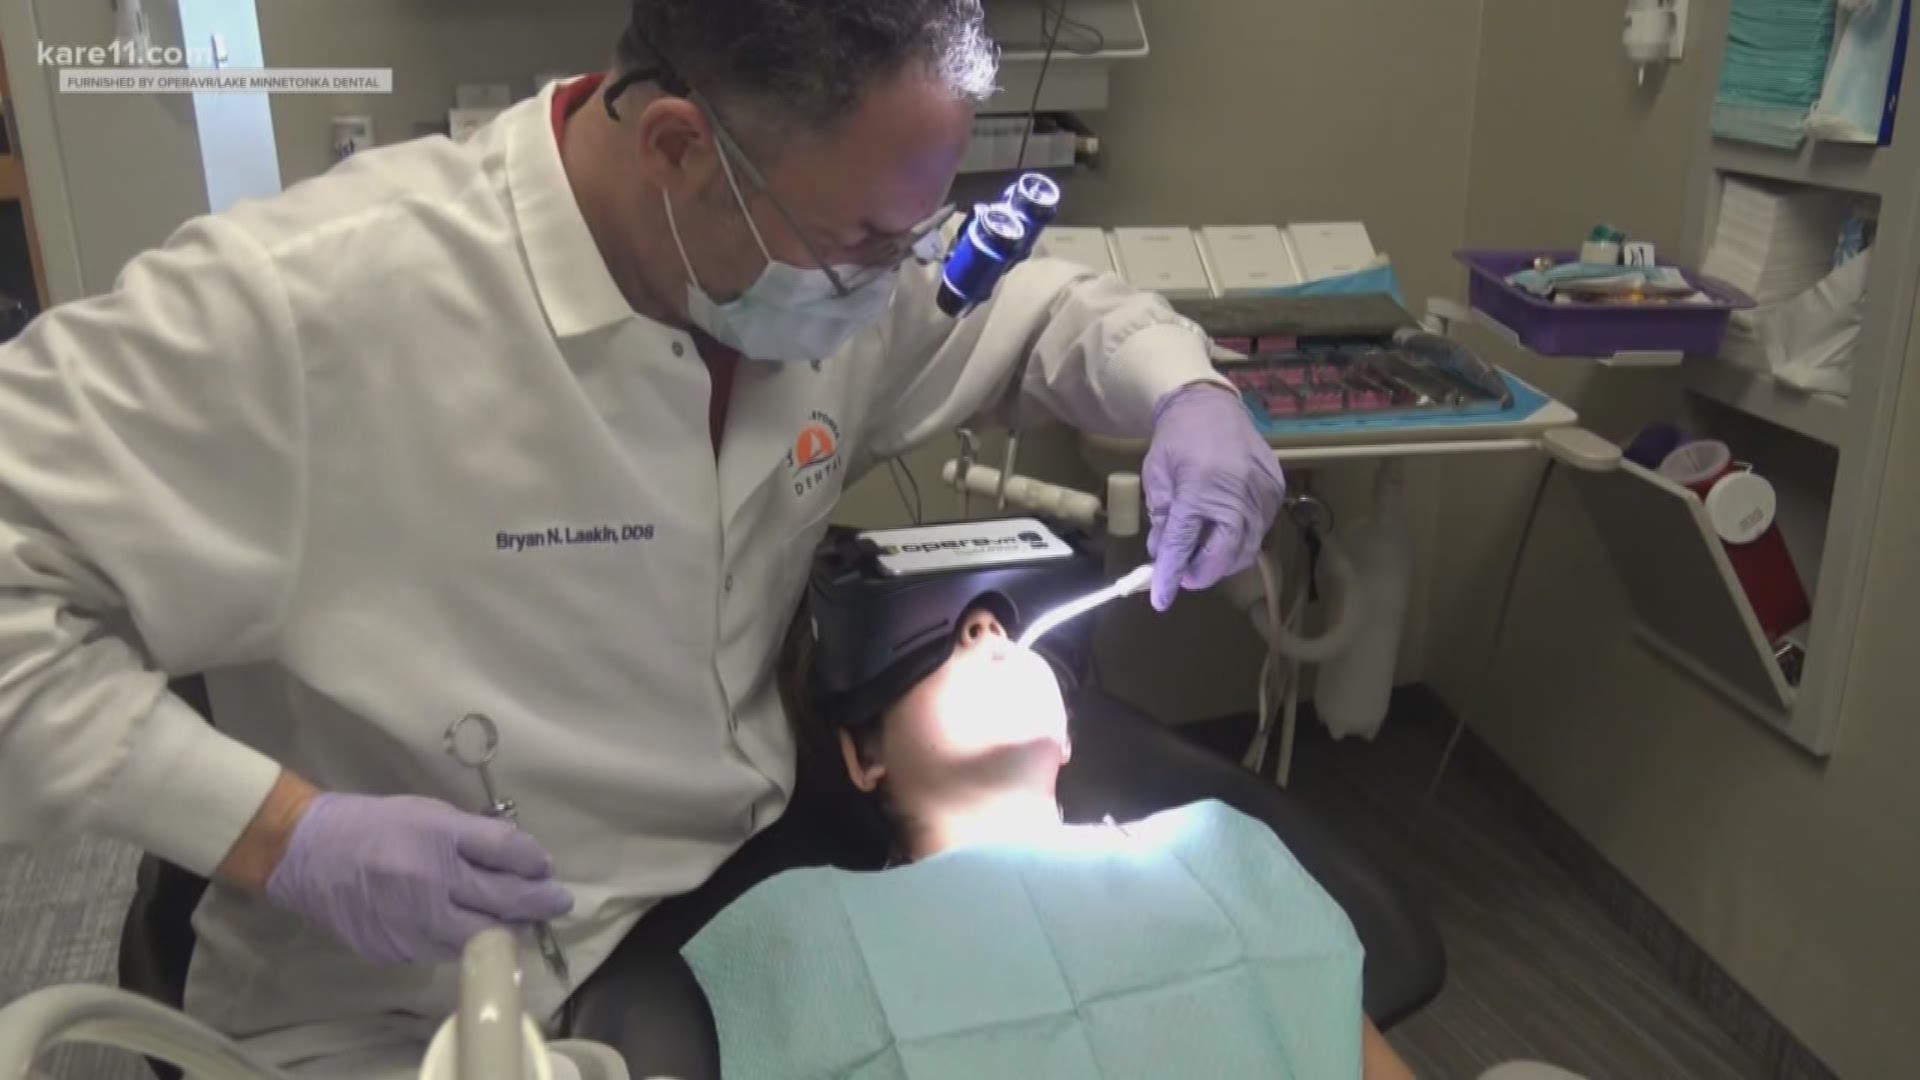 Minnetonka dentist invented a virtual reality system reducing need for painkillers during procedures.